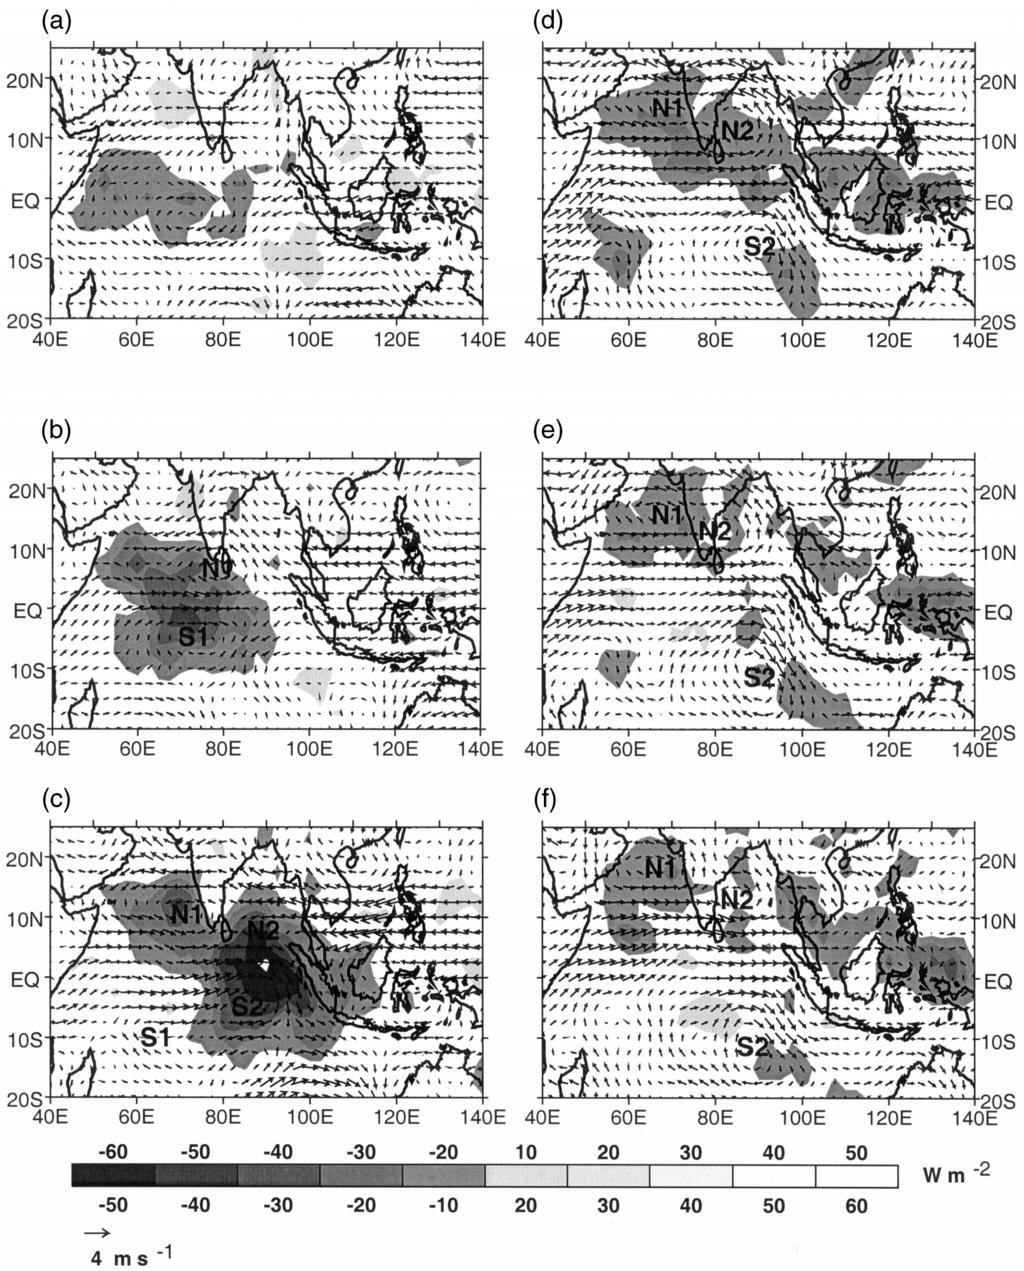 2932 JOURNAL OF CLIMATE VOLUME 14 FIG. 6. May Jun 1 100-day filtered 850-mb wind and OLR anomalies. Contours are OLR anomaly, with first contour at 10 W m 2. Vectors are the 850-mb wind anomaly.